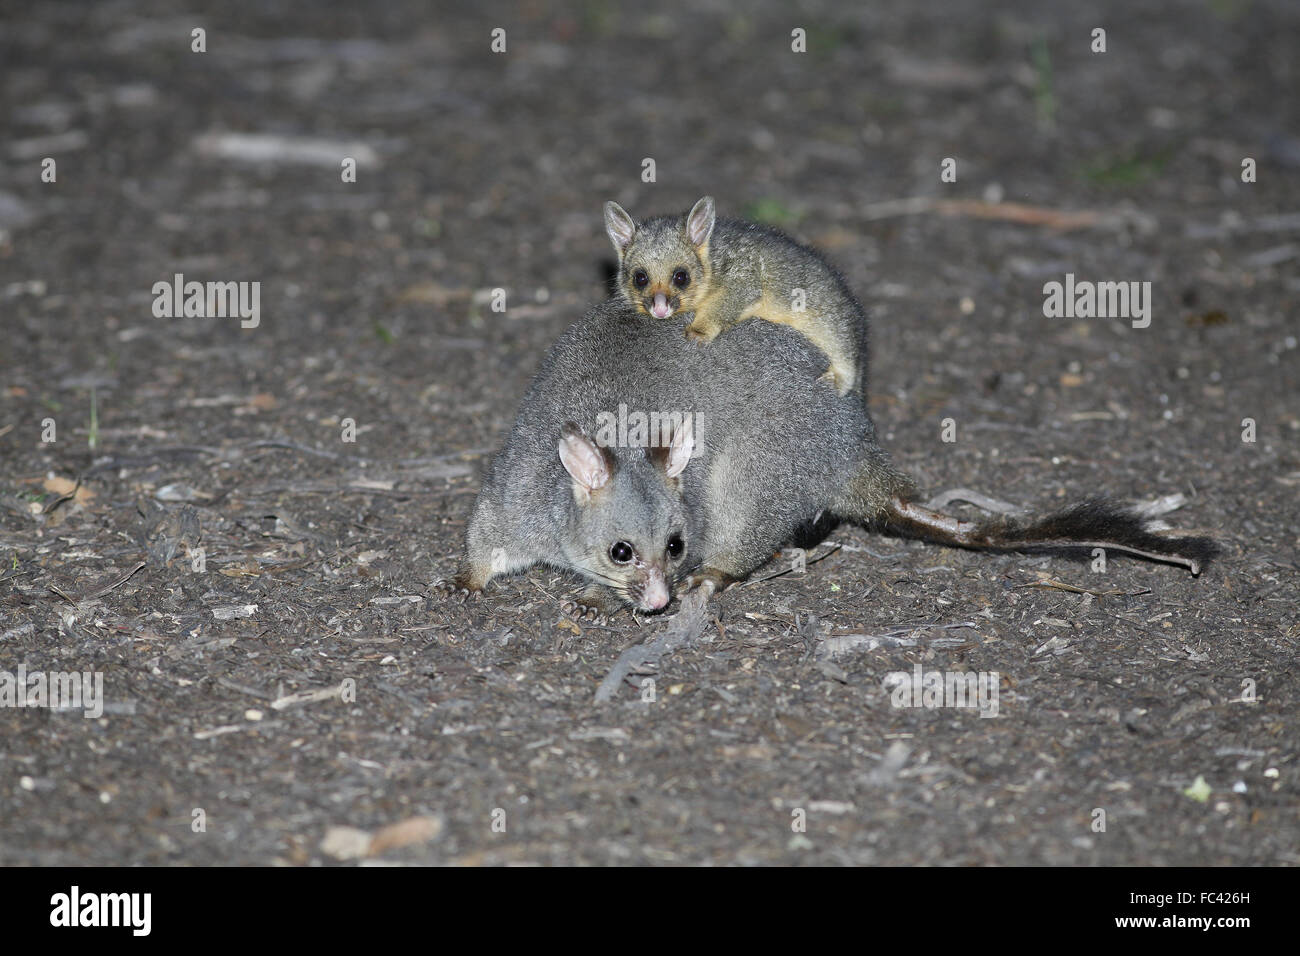 Common Brushtail Possum, Trichosurus vulpecula, with young riding on back Stock Photo